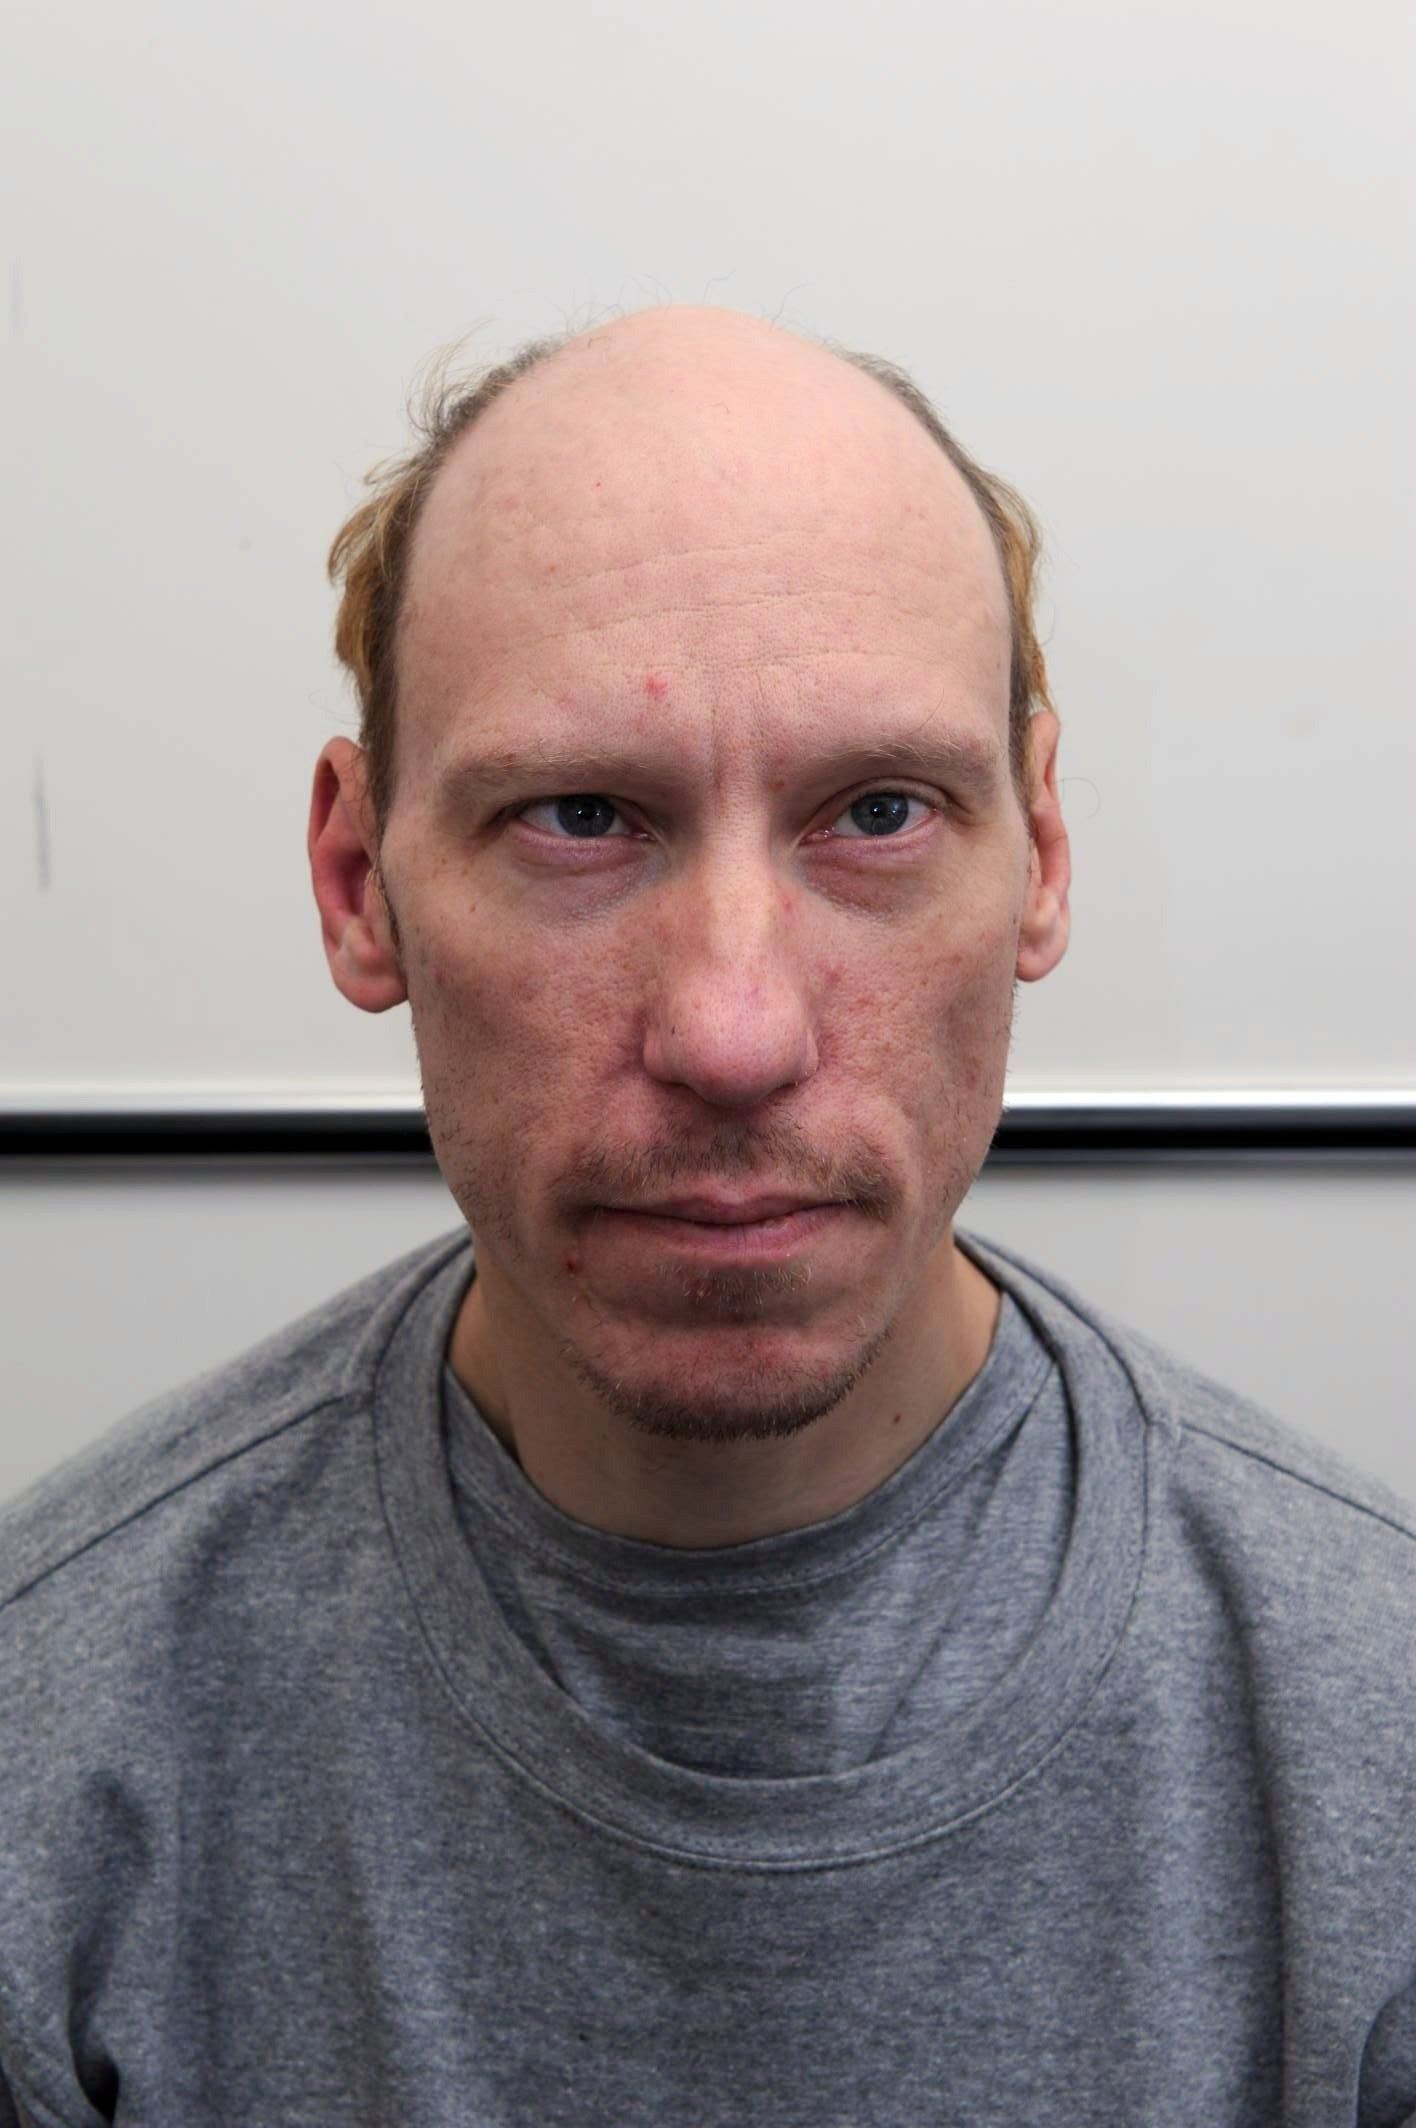 Stephen Port, the Grindr Killer, was sentenced to whole life imprisonment